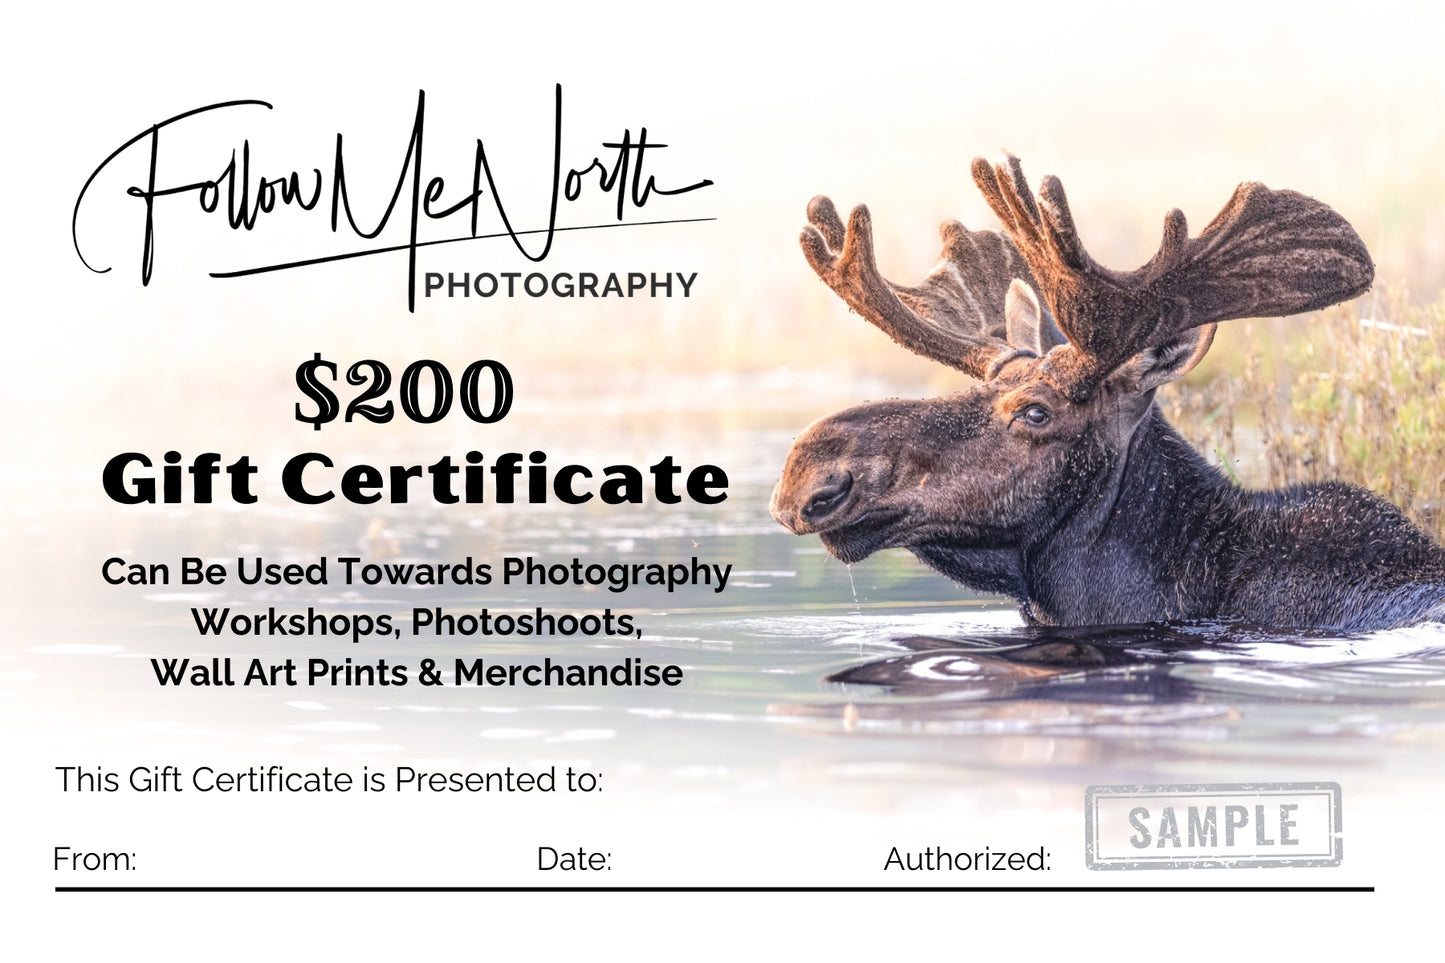 $200 Gift Certificate